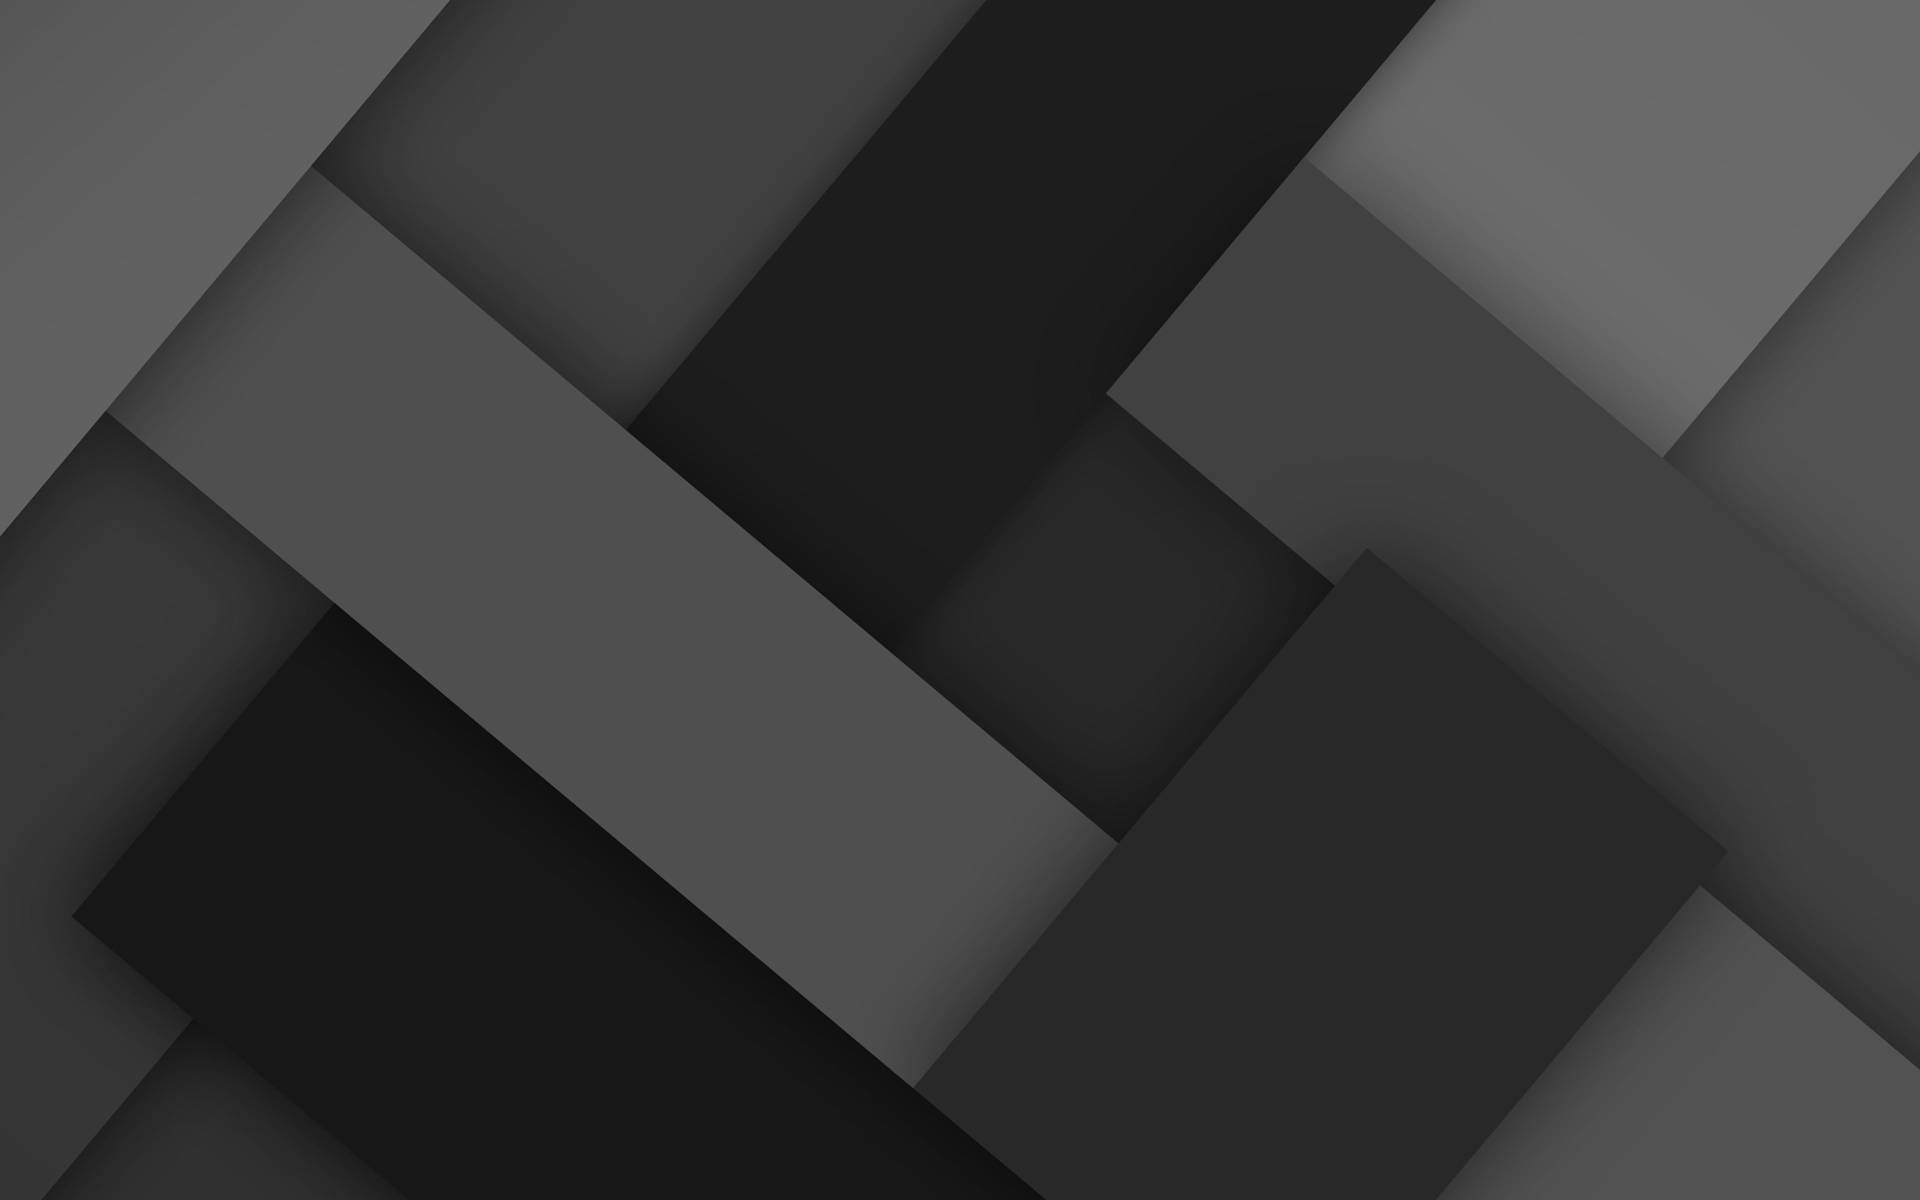 Black-gray Rectangles Android Material Design